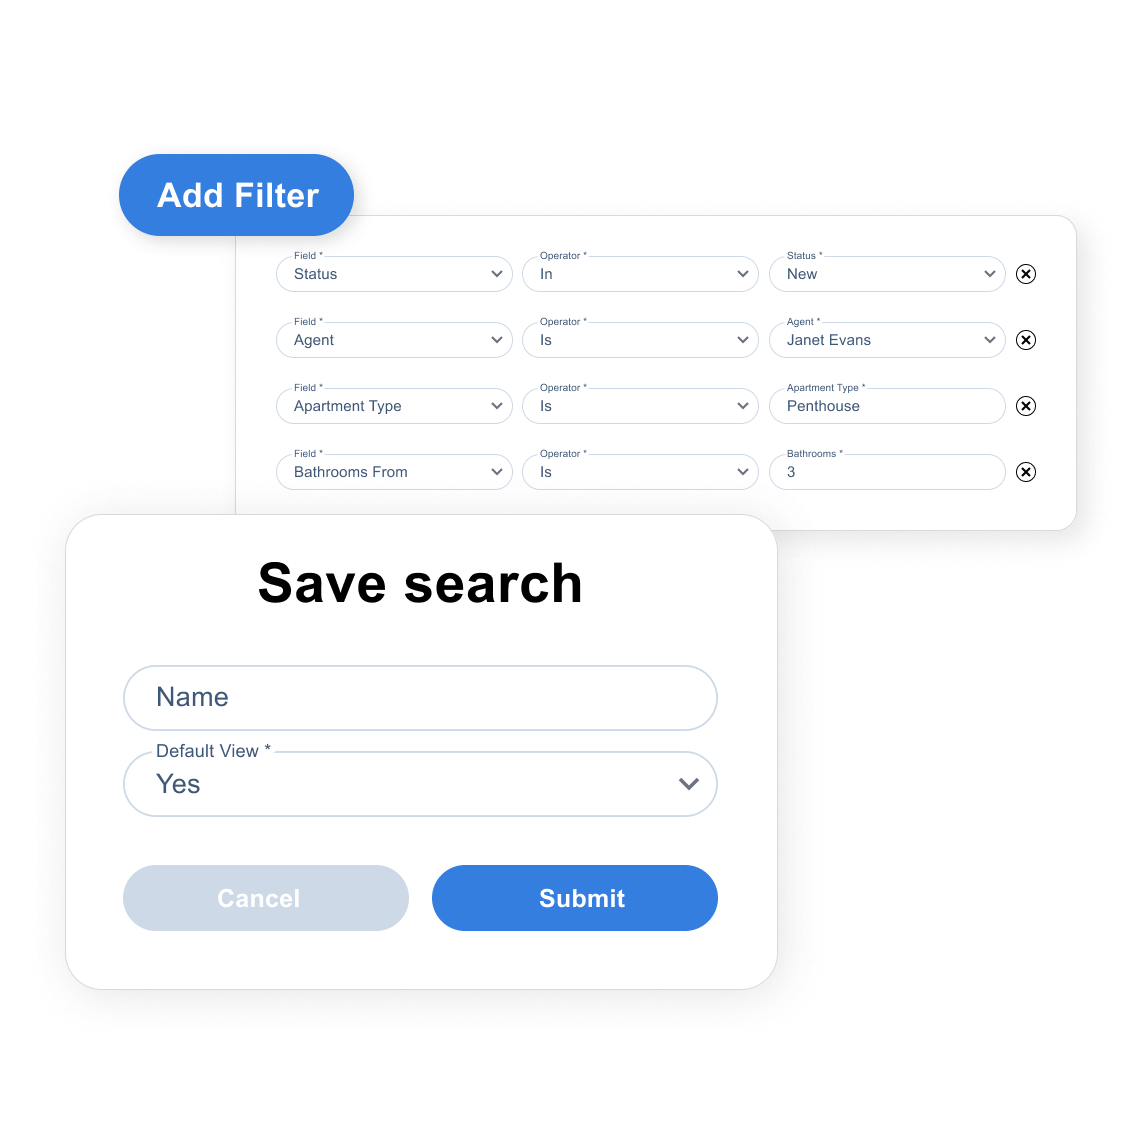 Filter search and save it to your dashboard